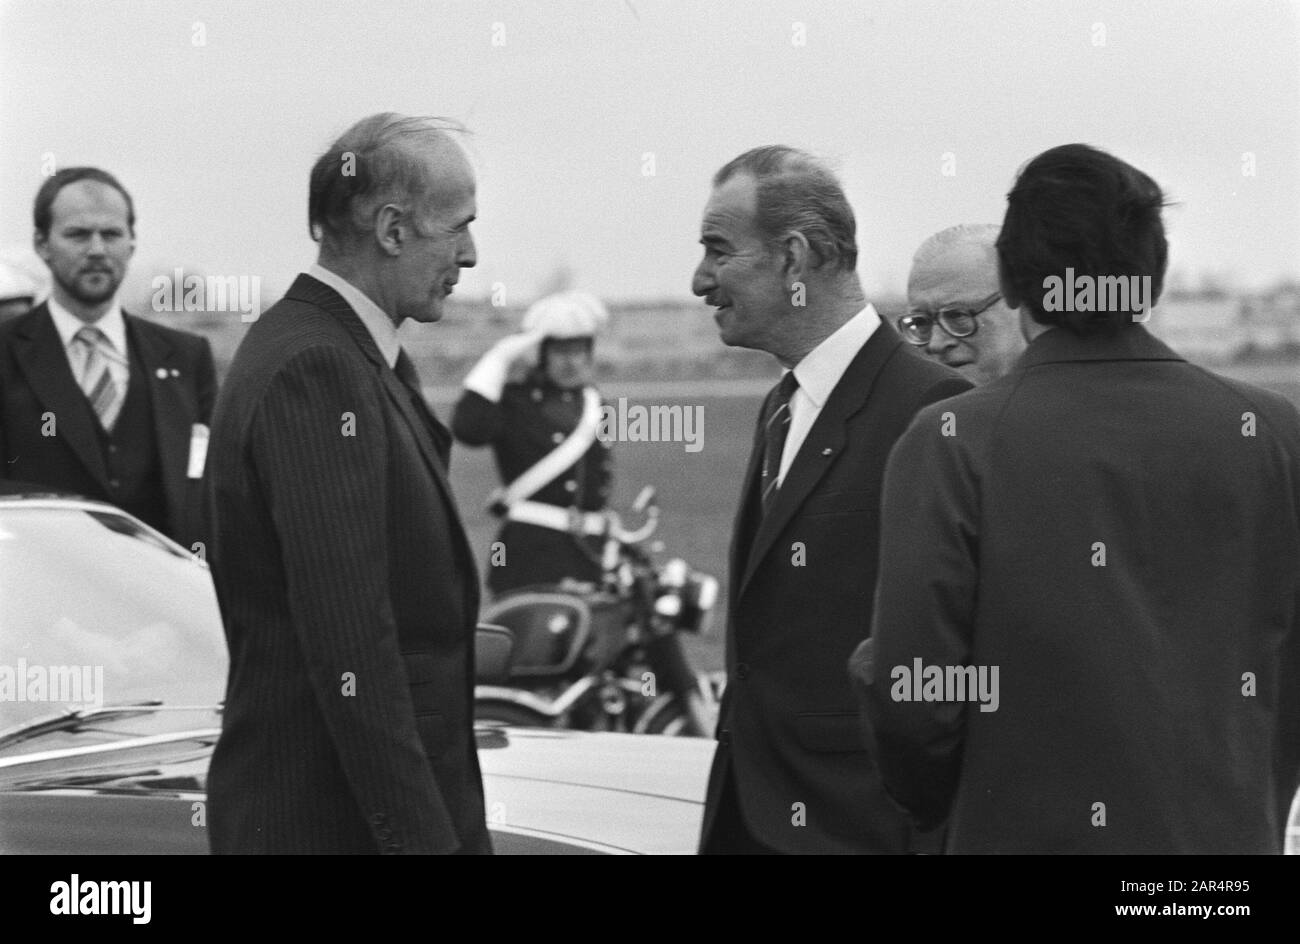 European Council in Maastricht, Minister Van der Klaauw and Valéry Giscard d'Estaing at Beek Airport Date: 23 March 1981 Location: Beek, Maastricht Keywords: ministers, airports Personal name : Giscard Destaing, Klaauw, Chris van der Stock Photo